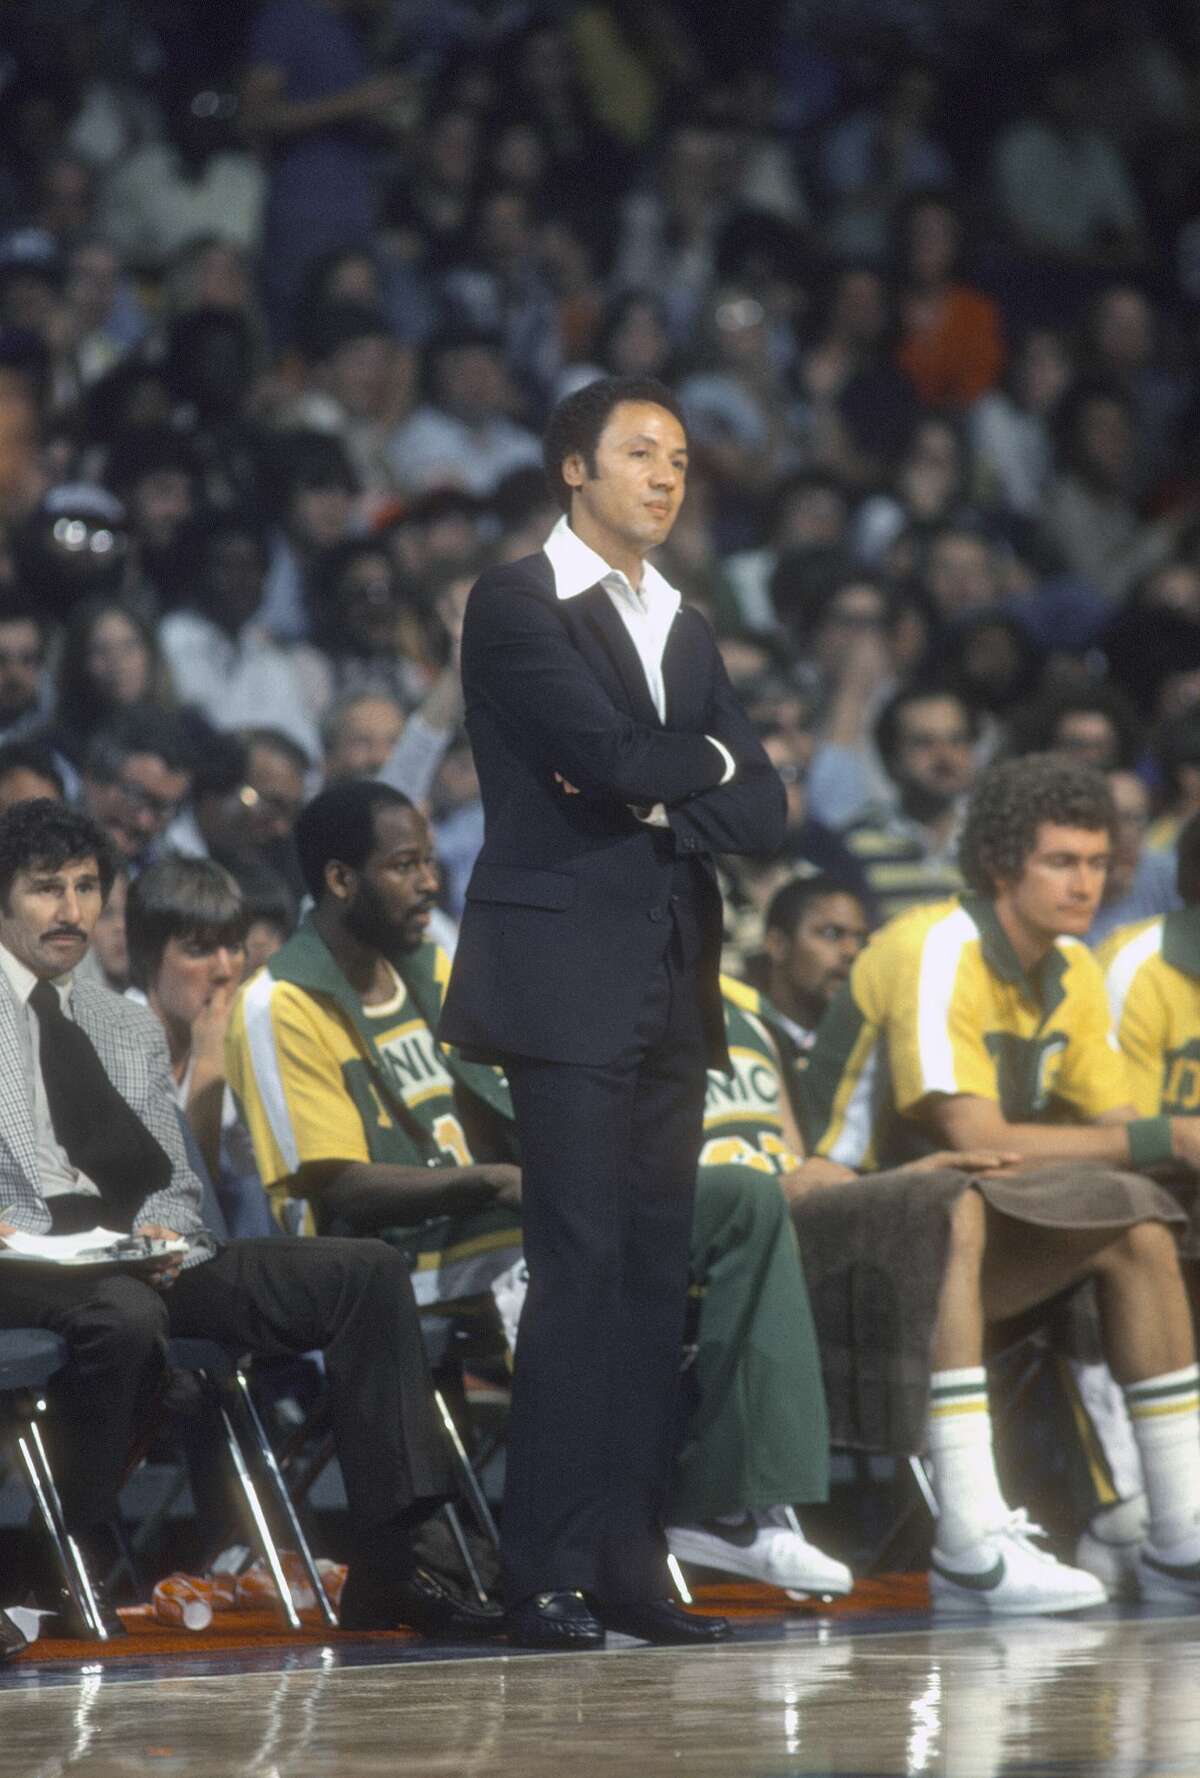 LANDOVER, MD - CIRCA 1978: Seattle Supersonics head coach Lenny Wilkens watches against the Washington Bullets during an NBA basketball game around 1978 at the Capital Center in Landover, Maryland.  Wilkens coached Supersonics from 1969-72 and 1977-85.  (Photo by Focus on Sport / Getty Images)